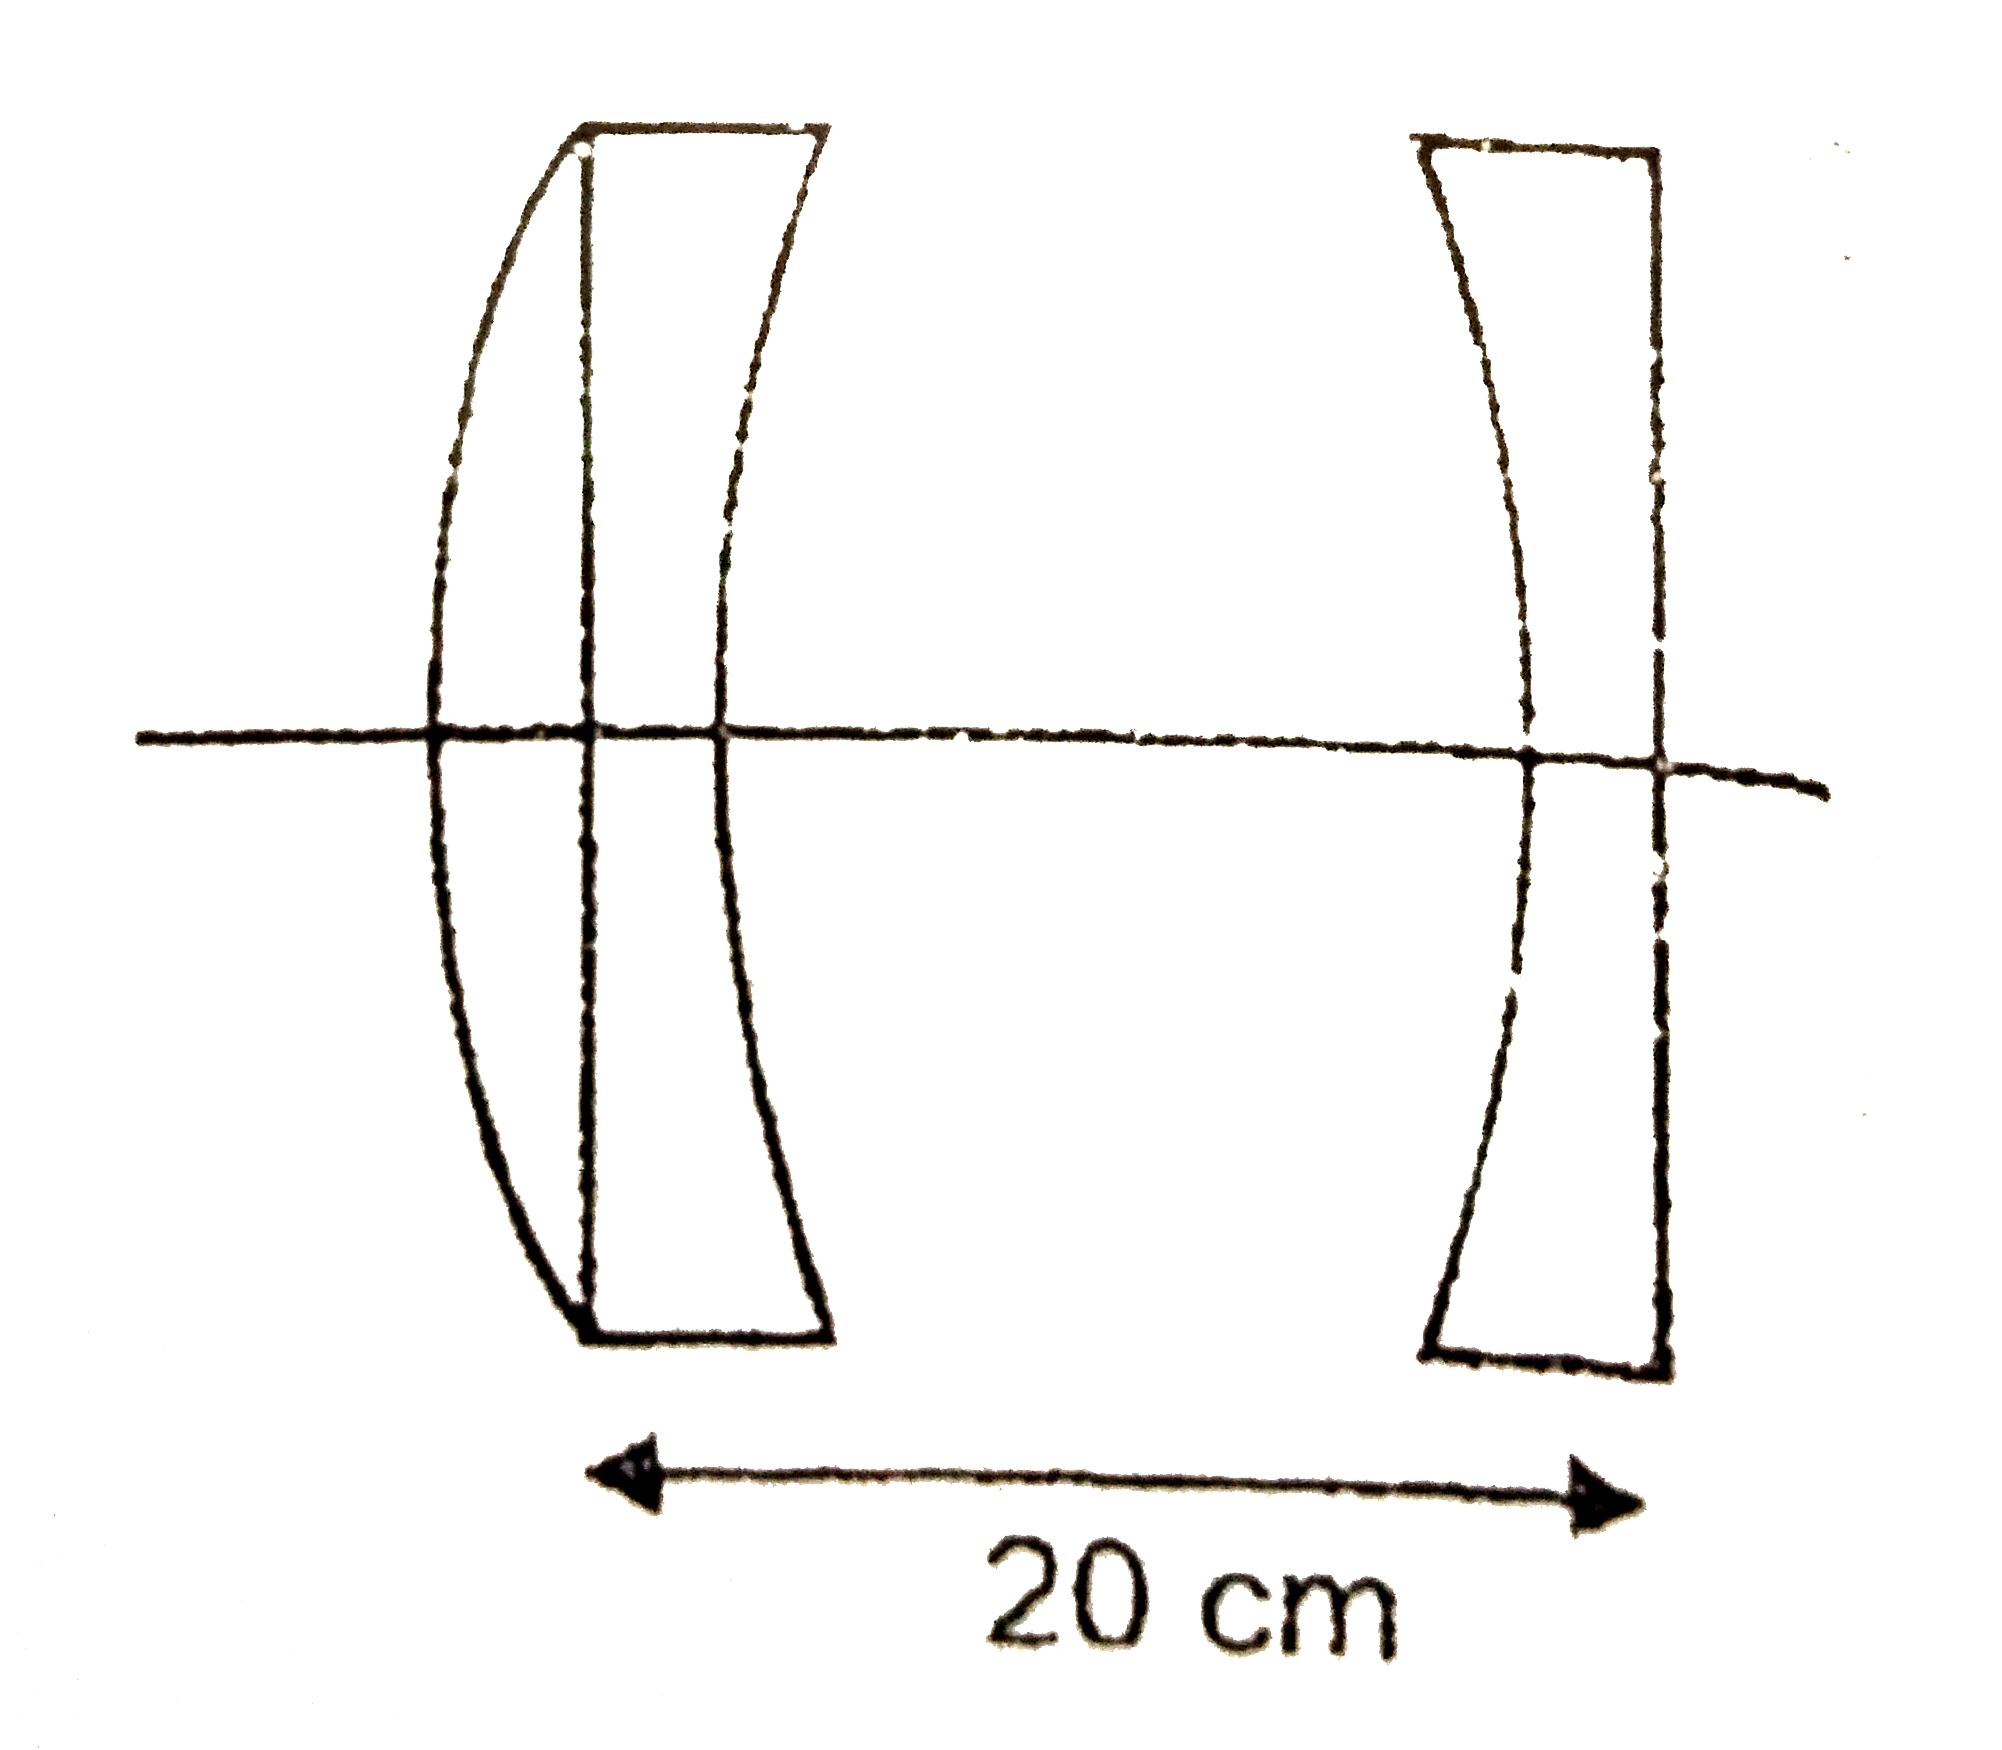 A symmetrical converging convex lens of focal length 10 cm & diverging concave symmetrical lens of focal length -20 cm are cut from the middle and perpendicularly  and symmetrically to their principal axis. The parts thus obtained are arrenged as shown in the figure. Find the focal length (in cm) of this arragement